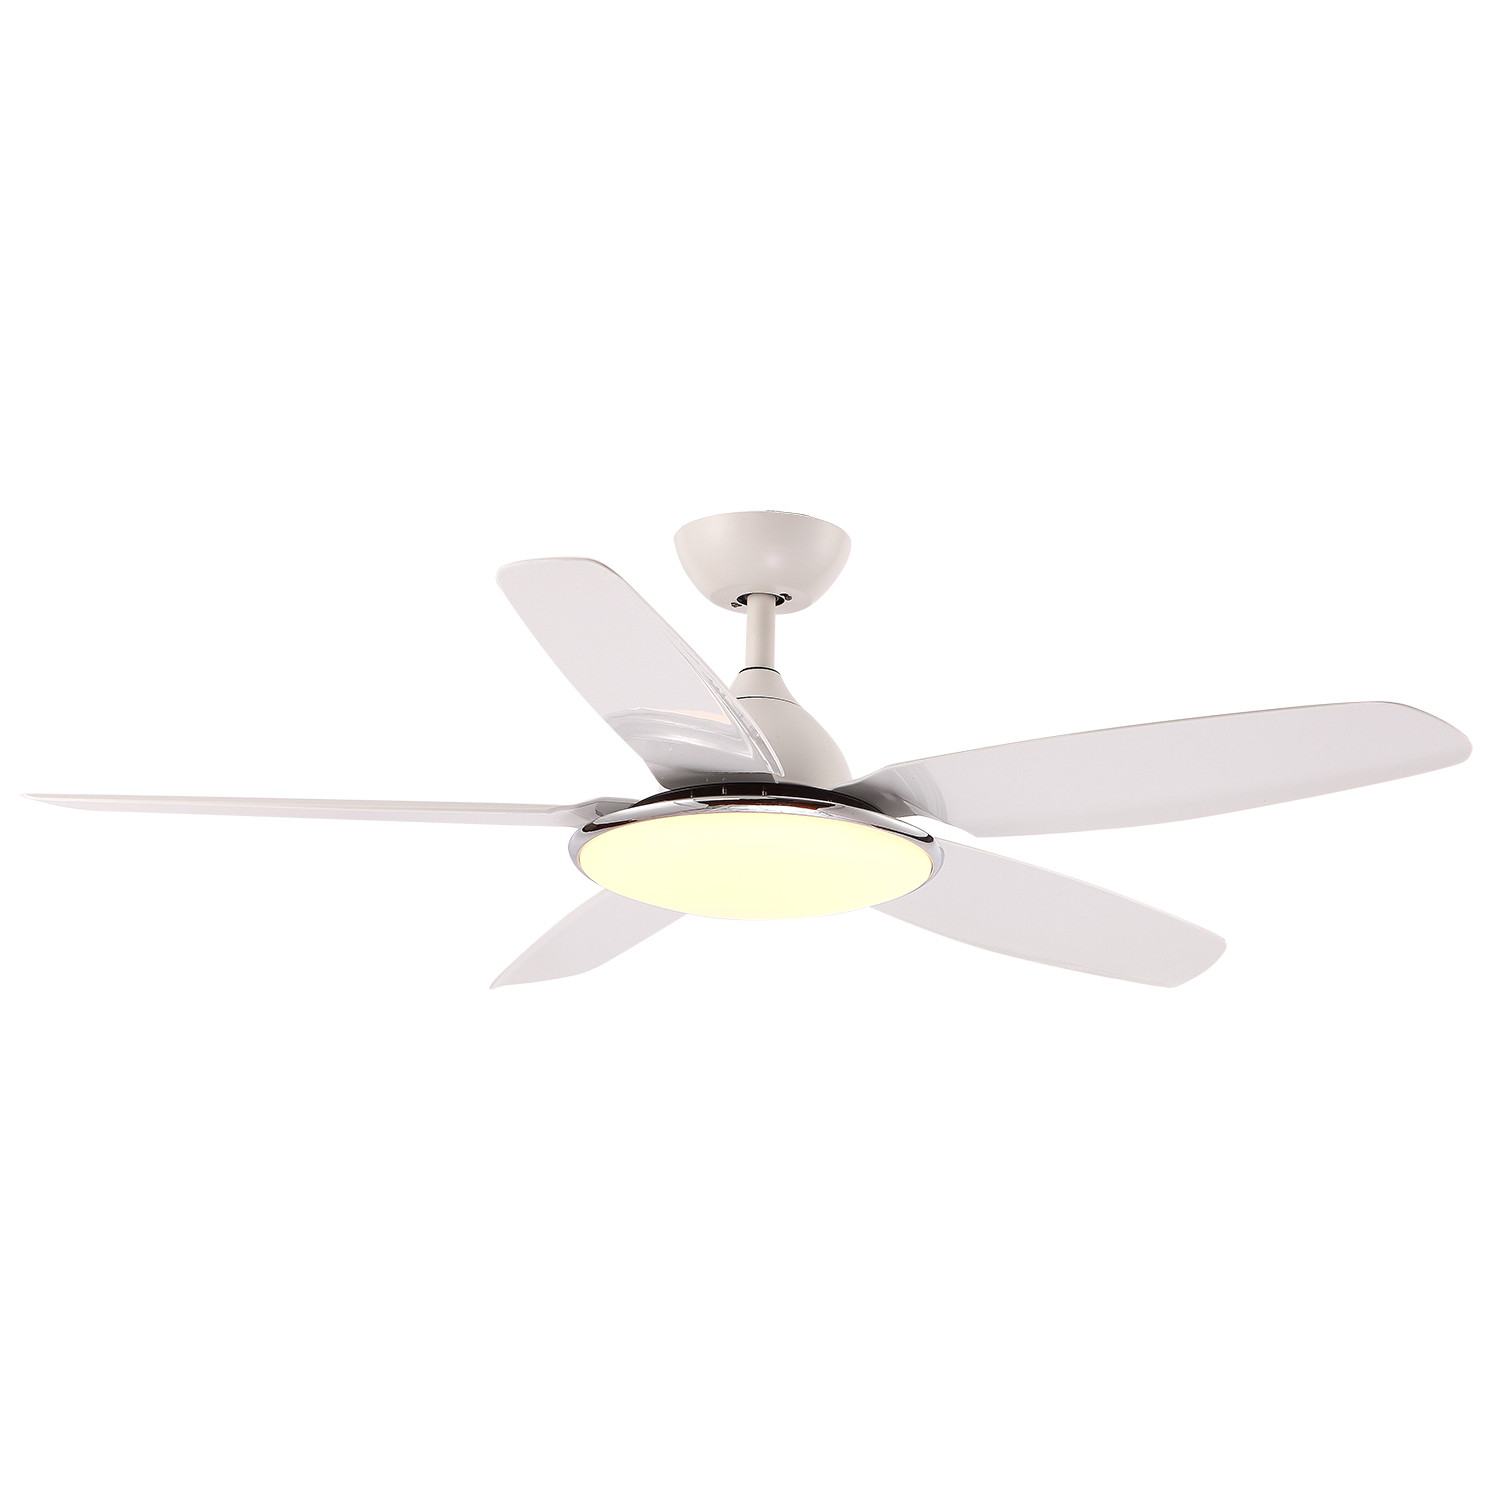 42" Classic Ceiling Fan Light With Remote Control